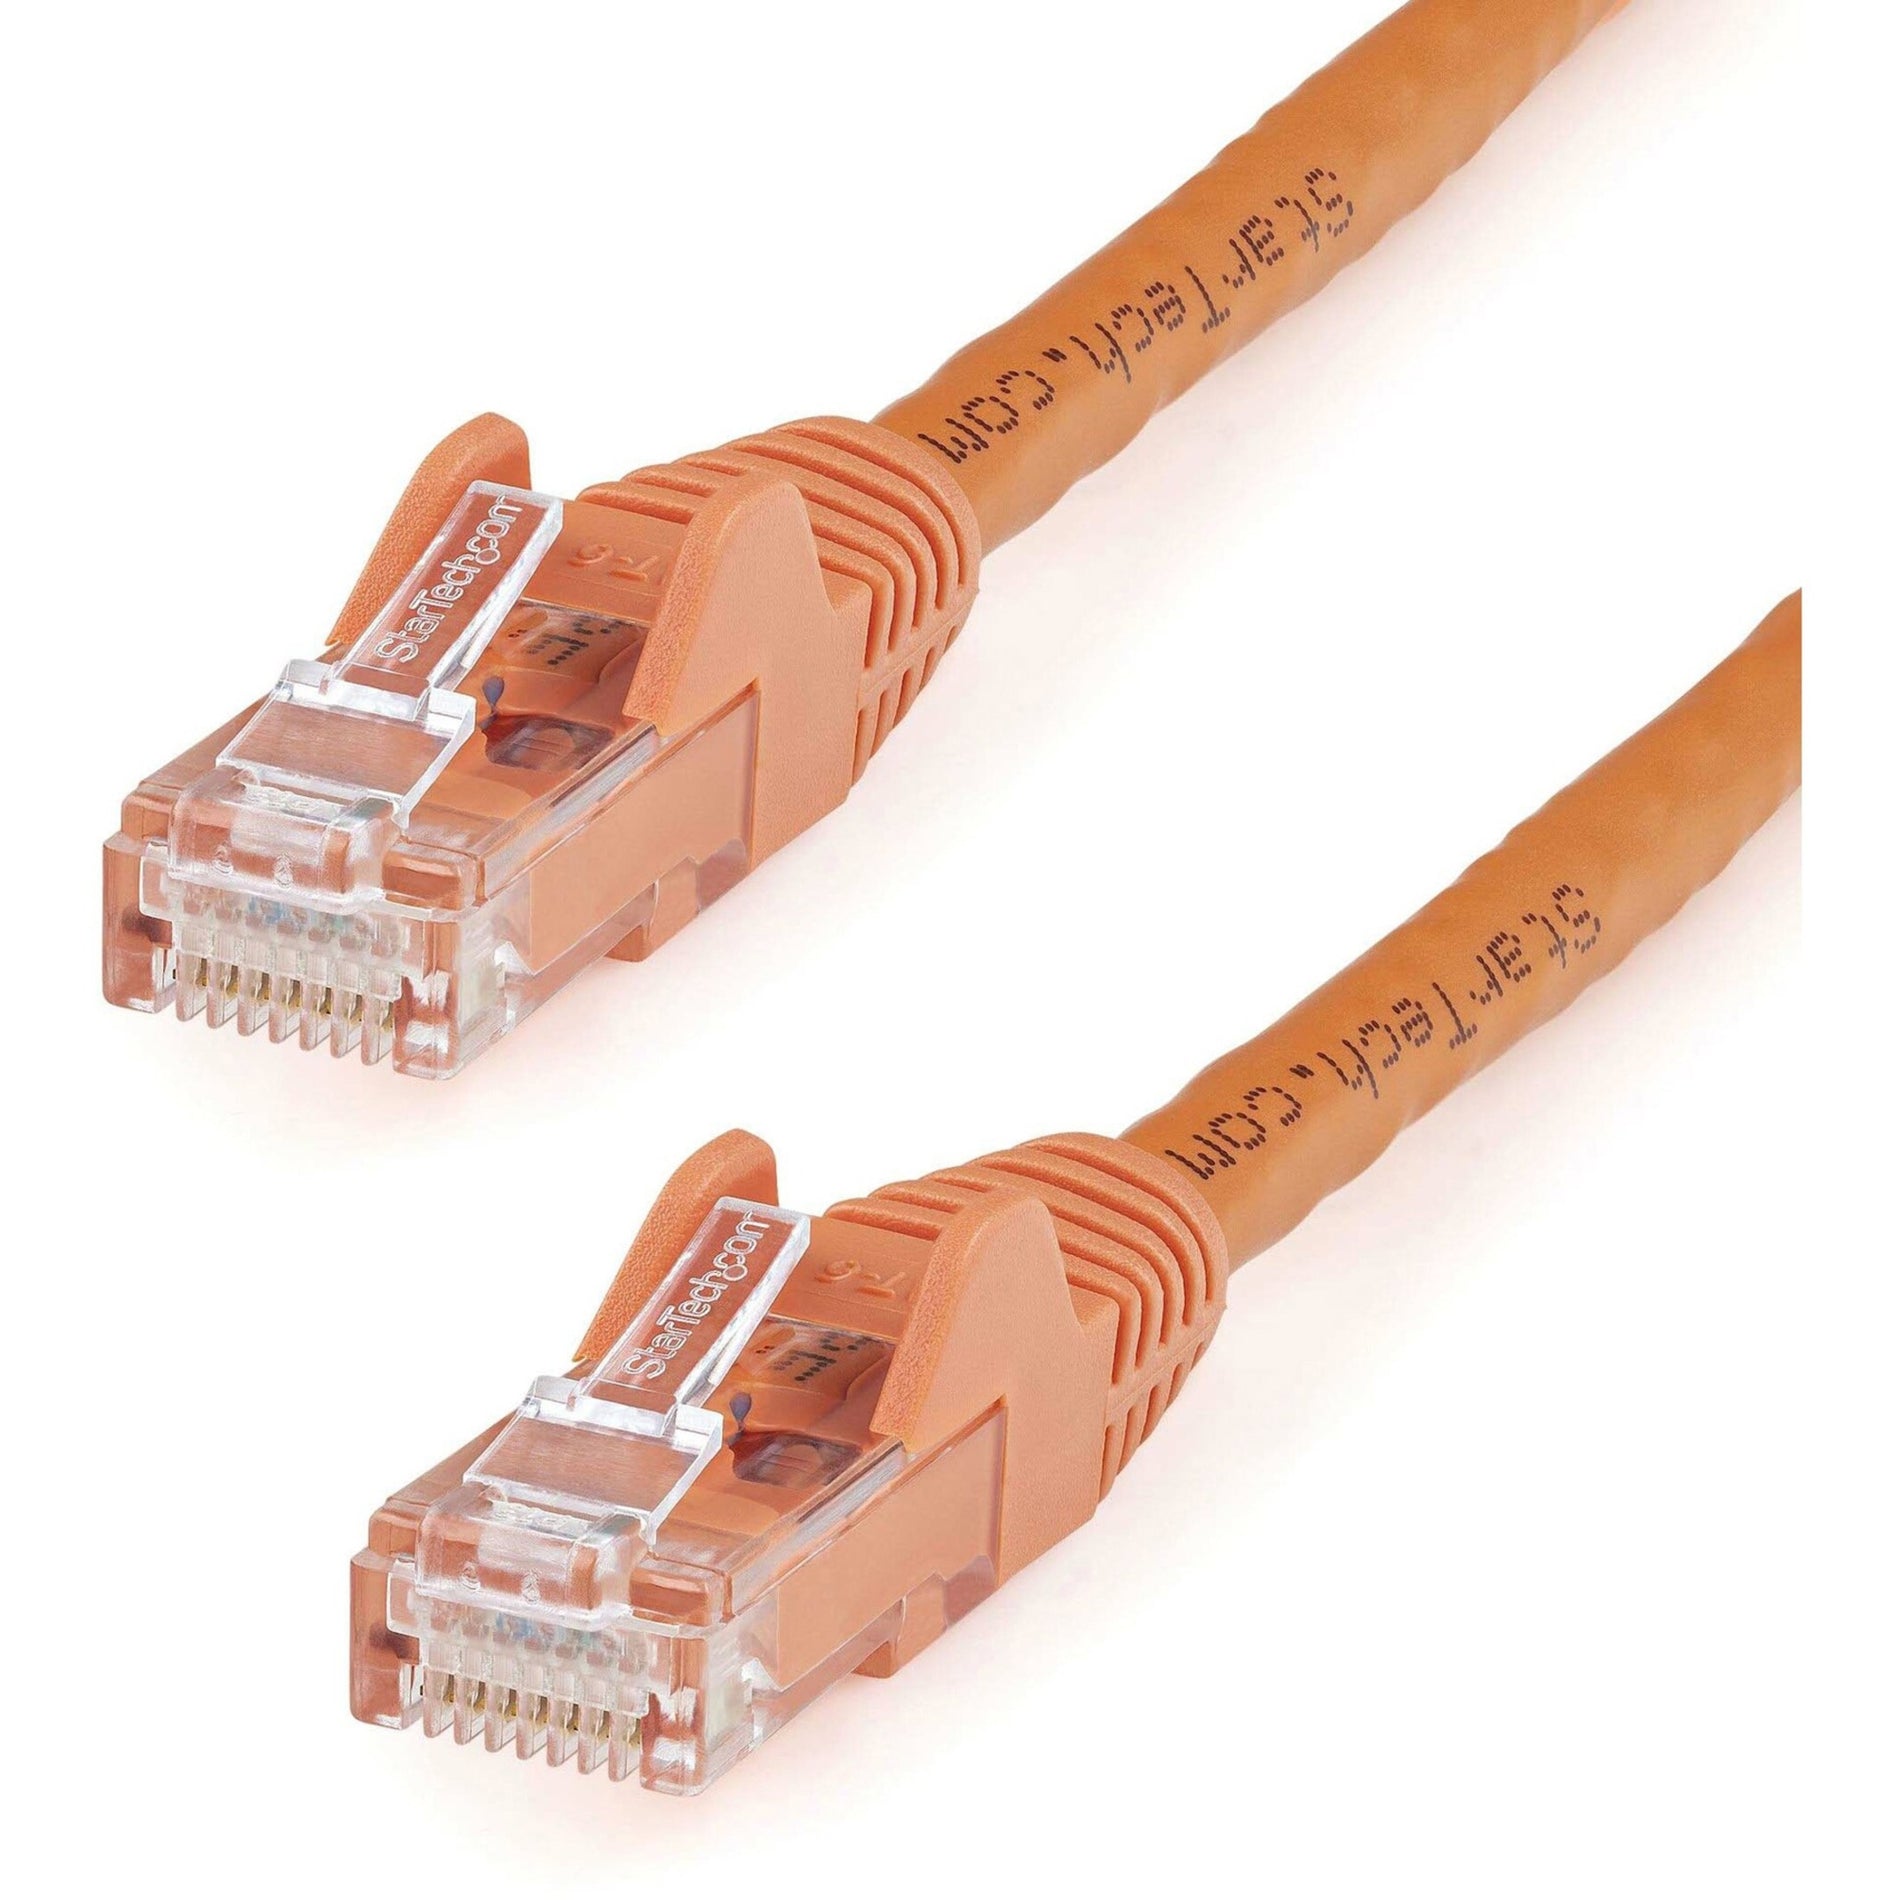 StarTech.com N6PATCH6INOR Cat.6 Patch Cable, 6in Orange, Short Ethernet Cable